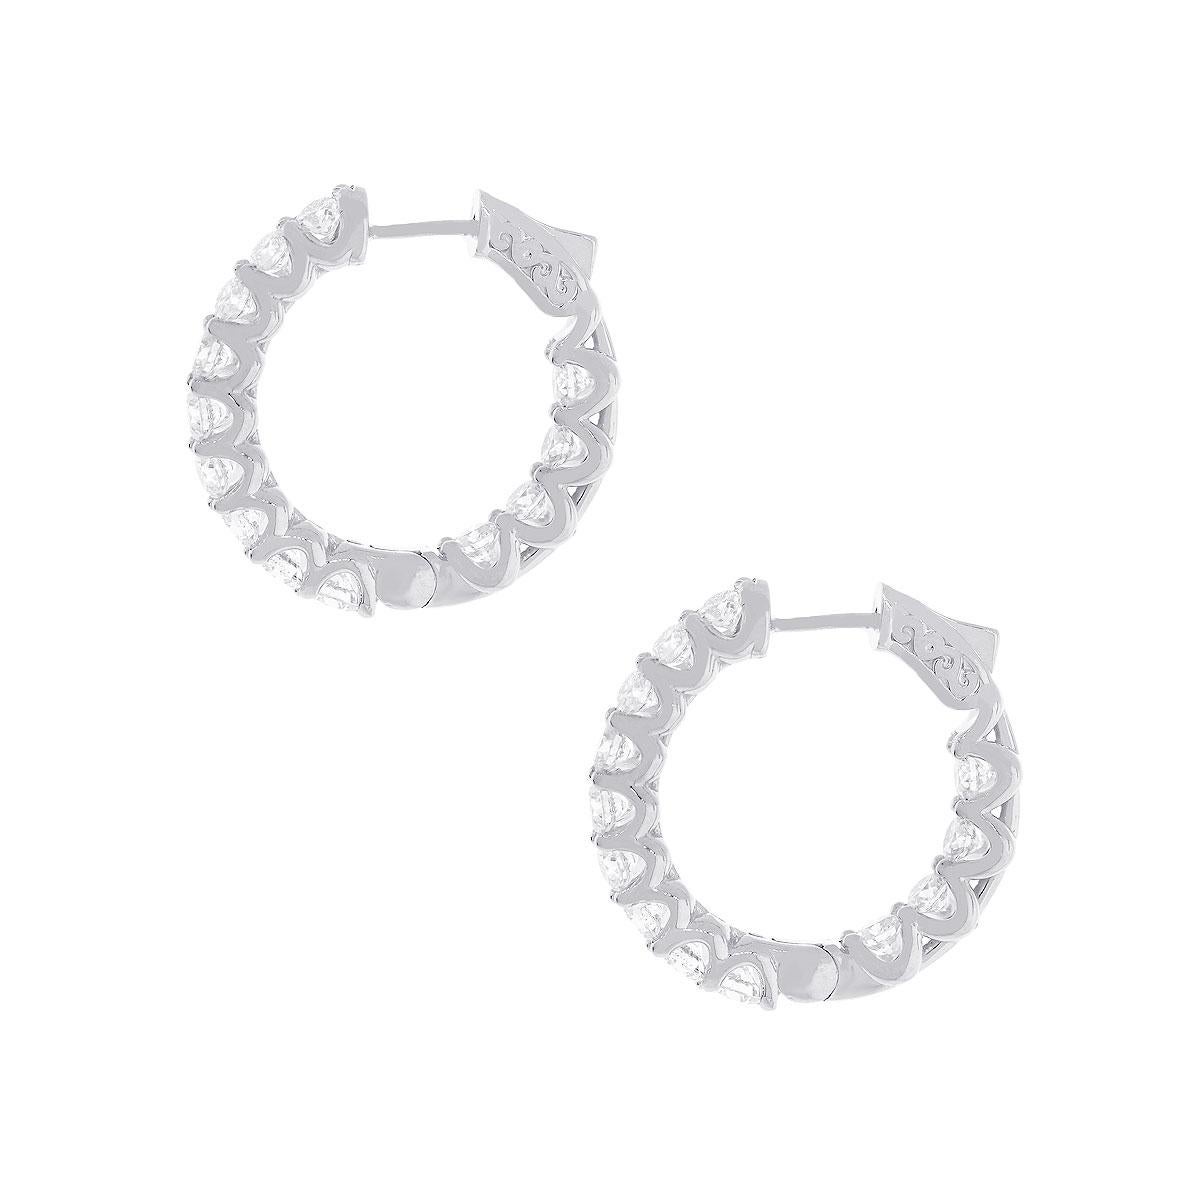 Material: 14k White Gold
Style: Diamond inside out hoop earrings
Diamond Details: 24 Stones, approximately 0.99ctw of round brilliant diamonds. Diamonds are G/H in color and VS in clarity.
Earring Measurements: 0.75″ x 0.20″ x 0.80″
Total Weight: